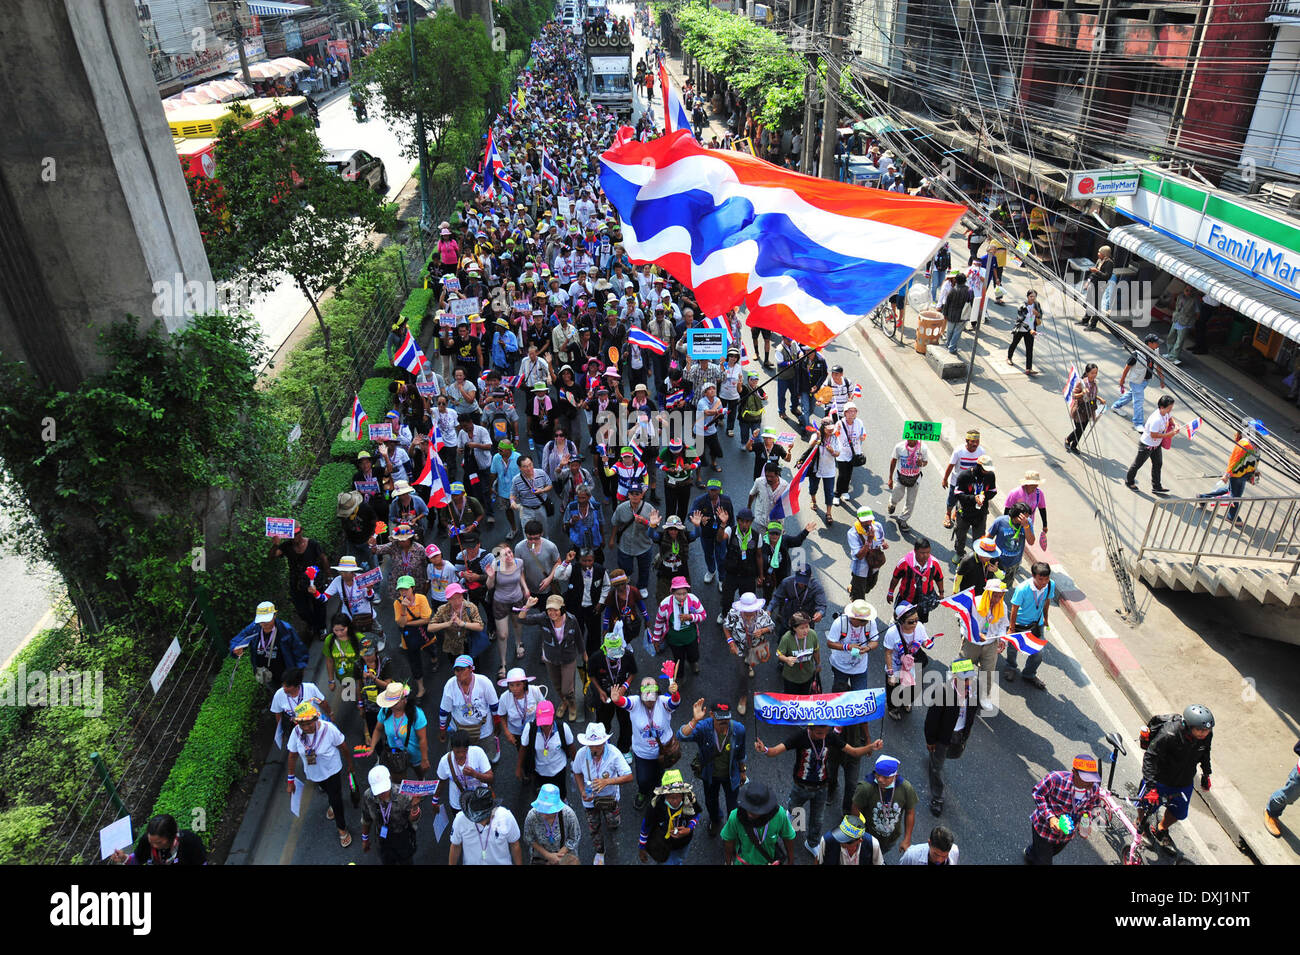 Bangkok, Thailand. 27th Mar, 2014. Anti-government supporters march through streets in Bangkok, Thailand, March 27, 2014. People's Democratic Reform Committee protesters marched in Bangkok for the fourth day to invite Bangkok people to join their mass rally on Saturday. Credit:  Rachen Sageamsak/Xinhua/Alamy Live News Stock Photo